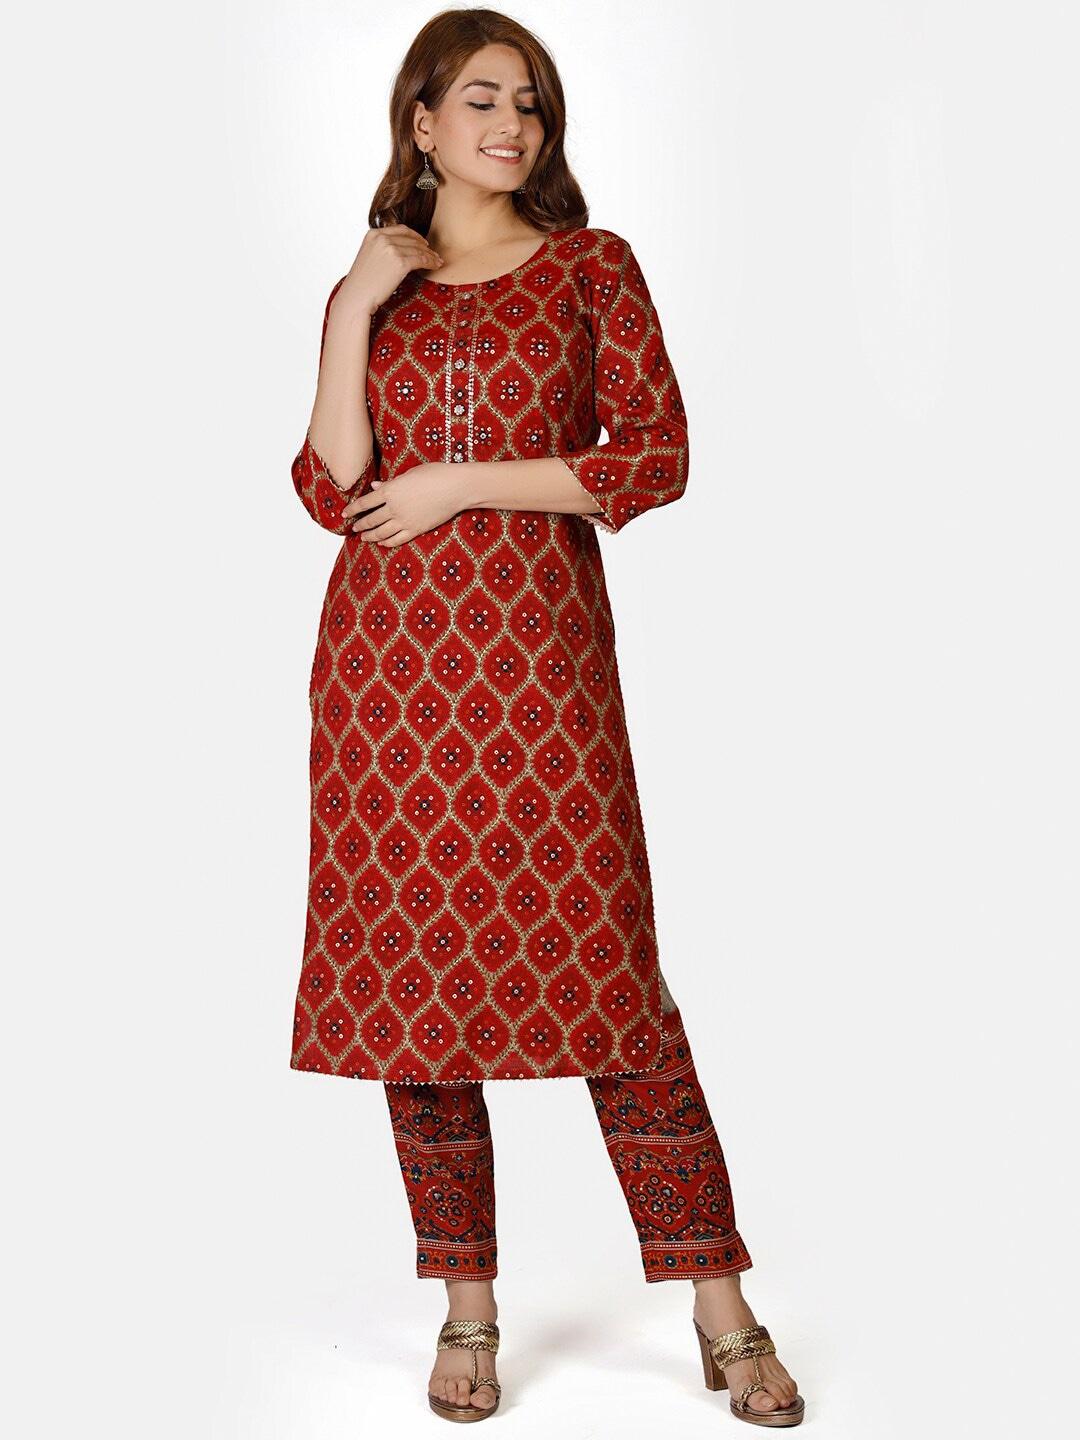 do-dhaage-women-red-ethnic-motifs-printed-mirror-work-kurta-with-trousers